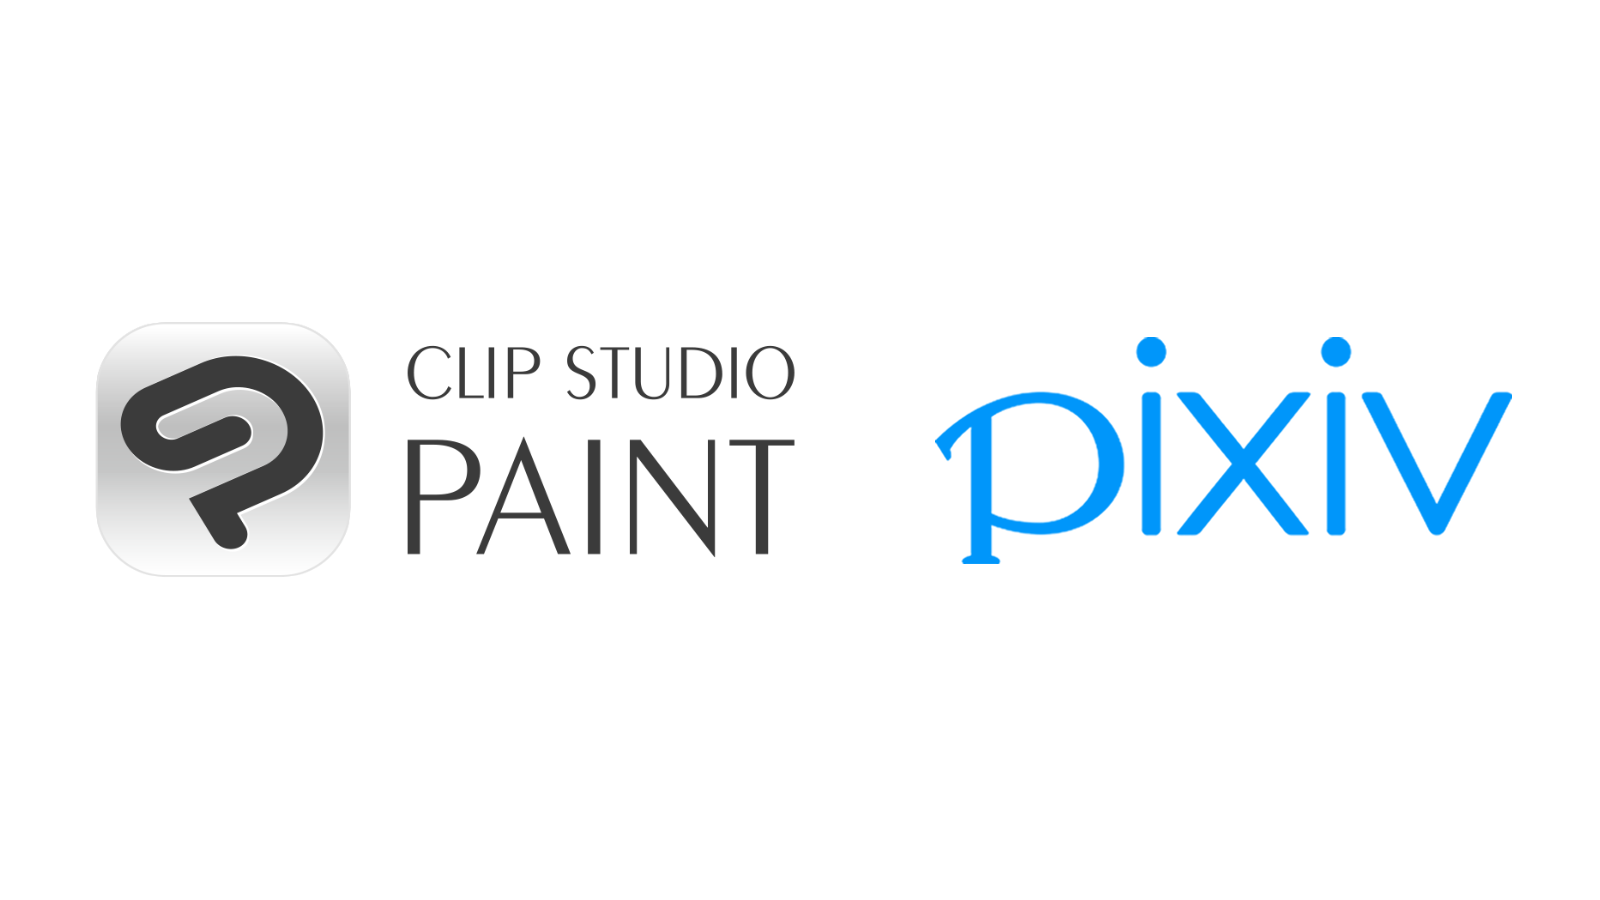 Clip Studio Paint DEBUT Partnership Case Study page updated with pixiv Inc. case study.